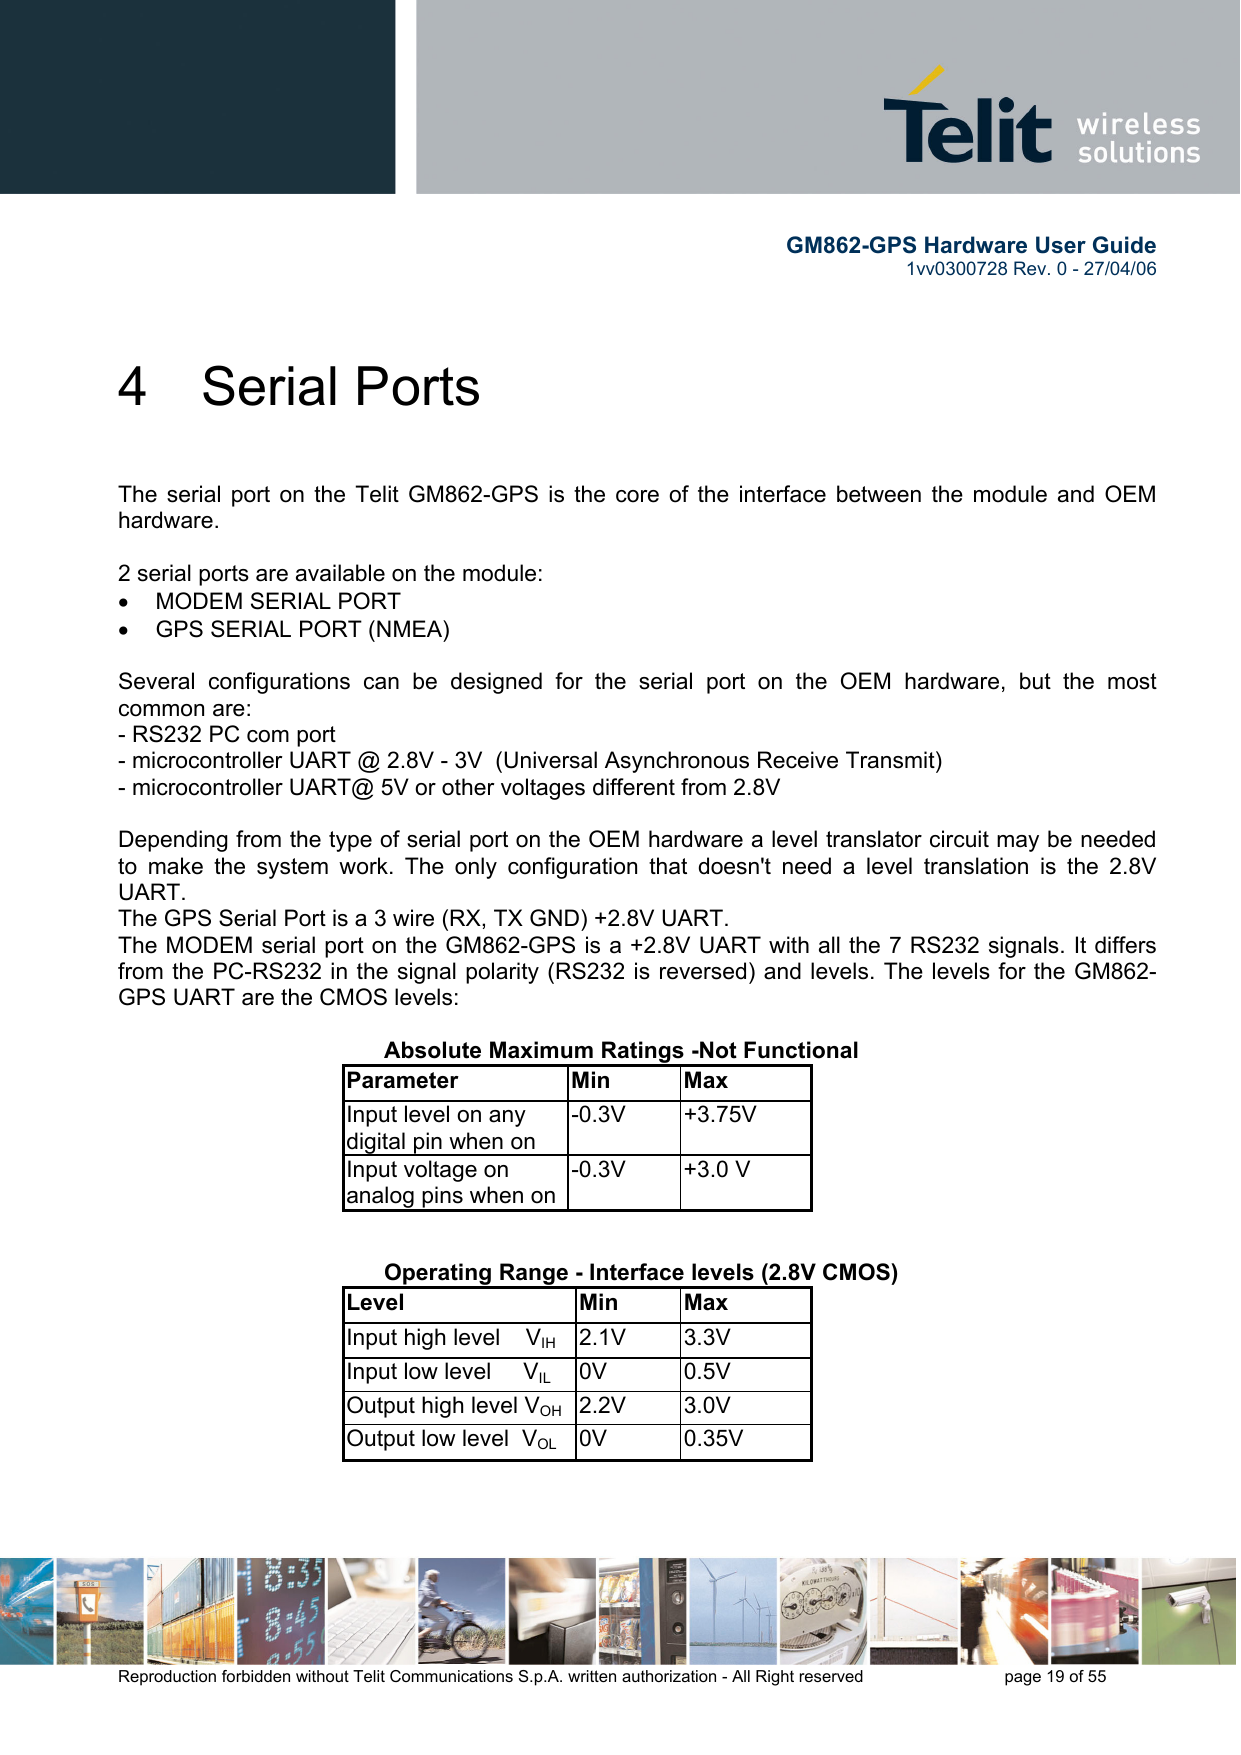        GM862-GPS Hardware User Guide   1vv0300728 Rev. 0 - 27/04/06    Reproduction forbidden without Telit Communications S.p.A. written authorization - All Right reserved    page 19 of 55  4 Serial Ports  The serial port on the Telit GM862-GPS is the core of the interface between the module and OEM hardware.   2 serial ports are available on the module: •  MODEM SERIAL PORT •  GPS SERIAL PORT (NMEA)  Several configurations can be designed for the serial port on the OEM hardware, but the most common are: - RS232 PC com port - microcontroller UART @ 2.8V - 3V  (Universal Asynchronous Receive Transmit)  - microcontroller UART@ 5V or other voltages different from 2.8V   Depending from the type of serial port on the OEM hardware a level translator circuit may be needed to make the system work. The only configuration that doesn&apos;t need a level translation is the 2.8V UART. The GPS Serial Port is a 3 wire (RX, TX GND) +2.8V UART. The MODEM serial port on the GM862-GPS is a +2.8V UART with all the 7 RS232 signals. It differs from the PC-RS232 in the signal polarity (RS232 is reversed) and levels. The levels for the GM862-GPS UART are the CMOS levels:     Absolute Maximum Ratings -Not Functional Parameter Min Max Input level on any digital pin when on -0.3V +3.75V Input voltage on analog pins when on-0.3V +3.0 V      Operating Range - Interface levels (2.8V CMOS) Level Min Max Input high level    VIH  2.1V 3.3V Input low level     VIL 0V  0.5V Output high level VOH 2.2V  3.0V Output low level  VOL 0V  0.35V    